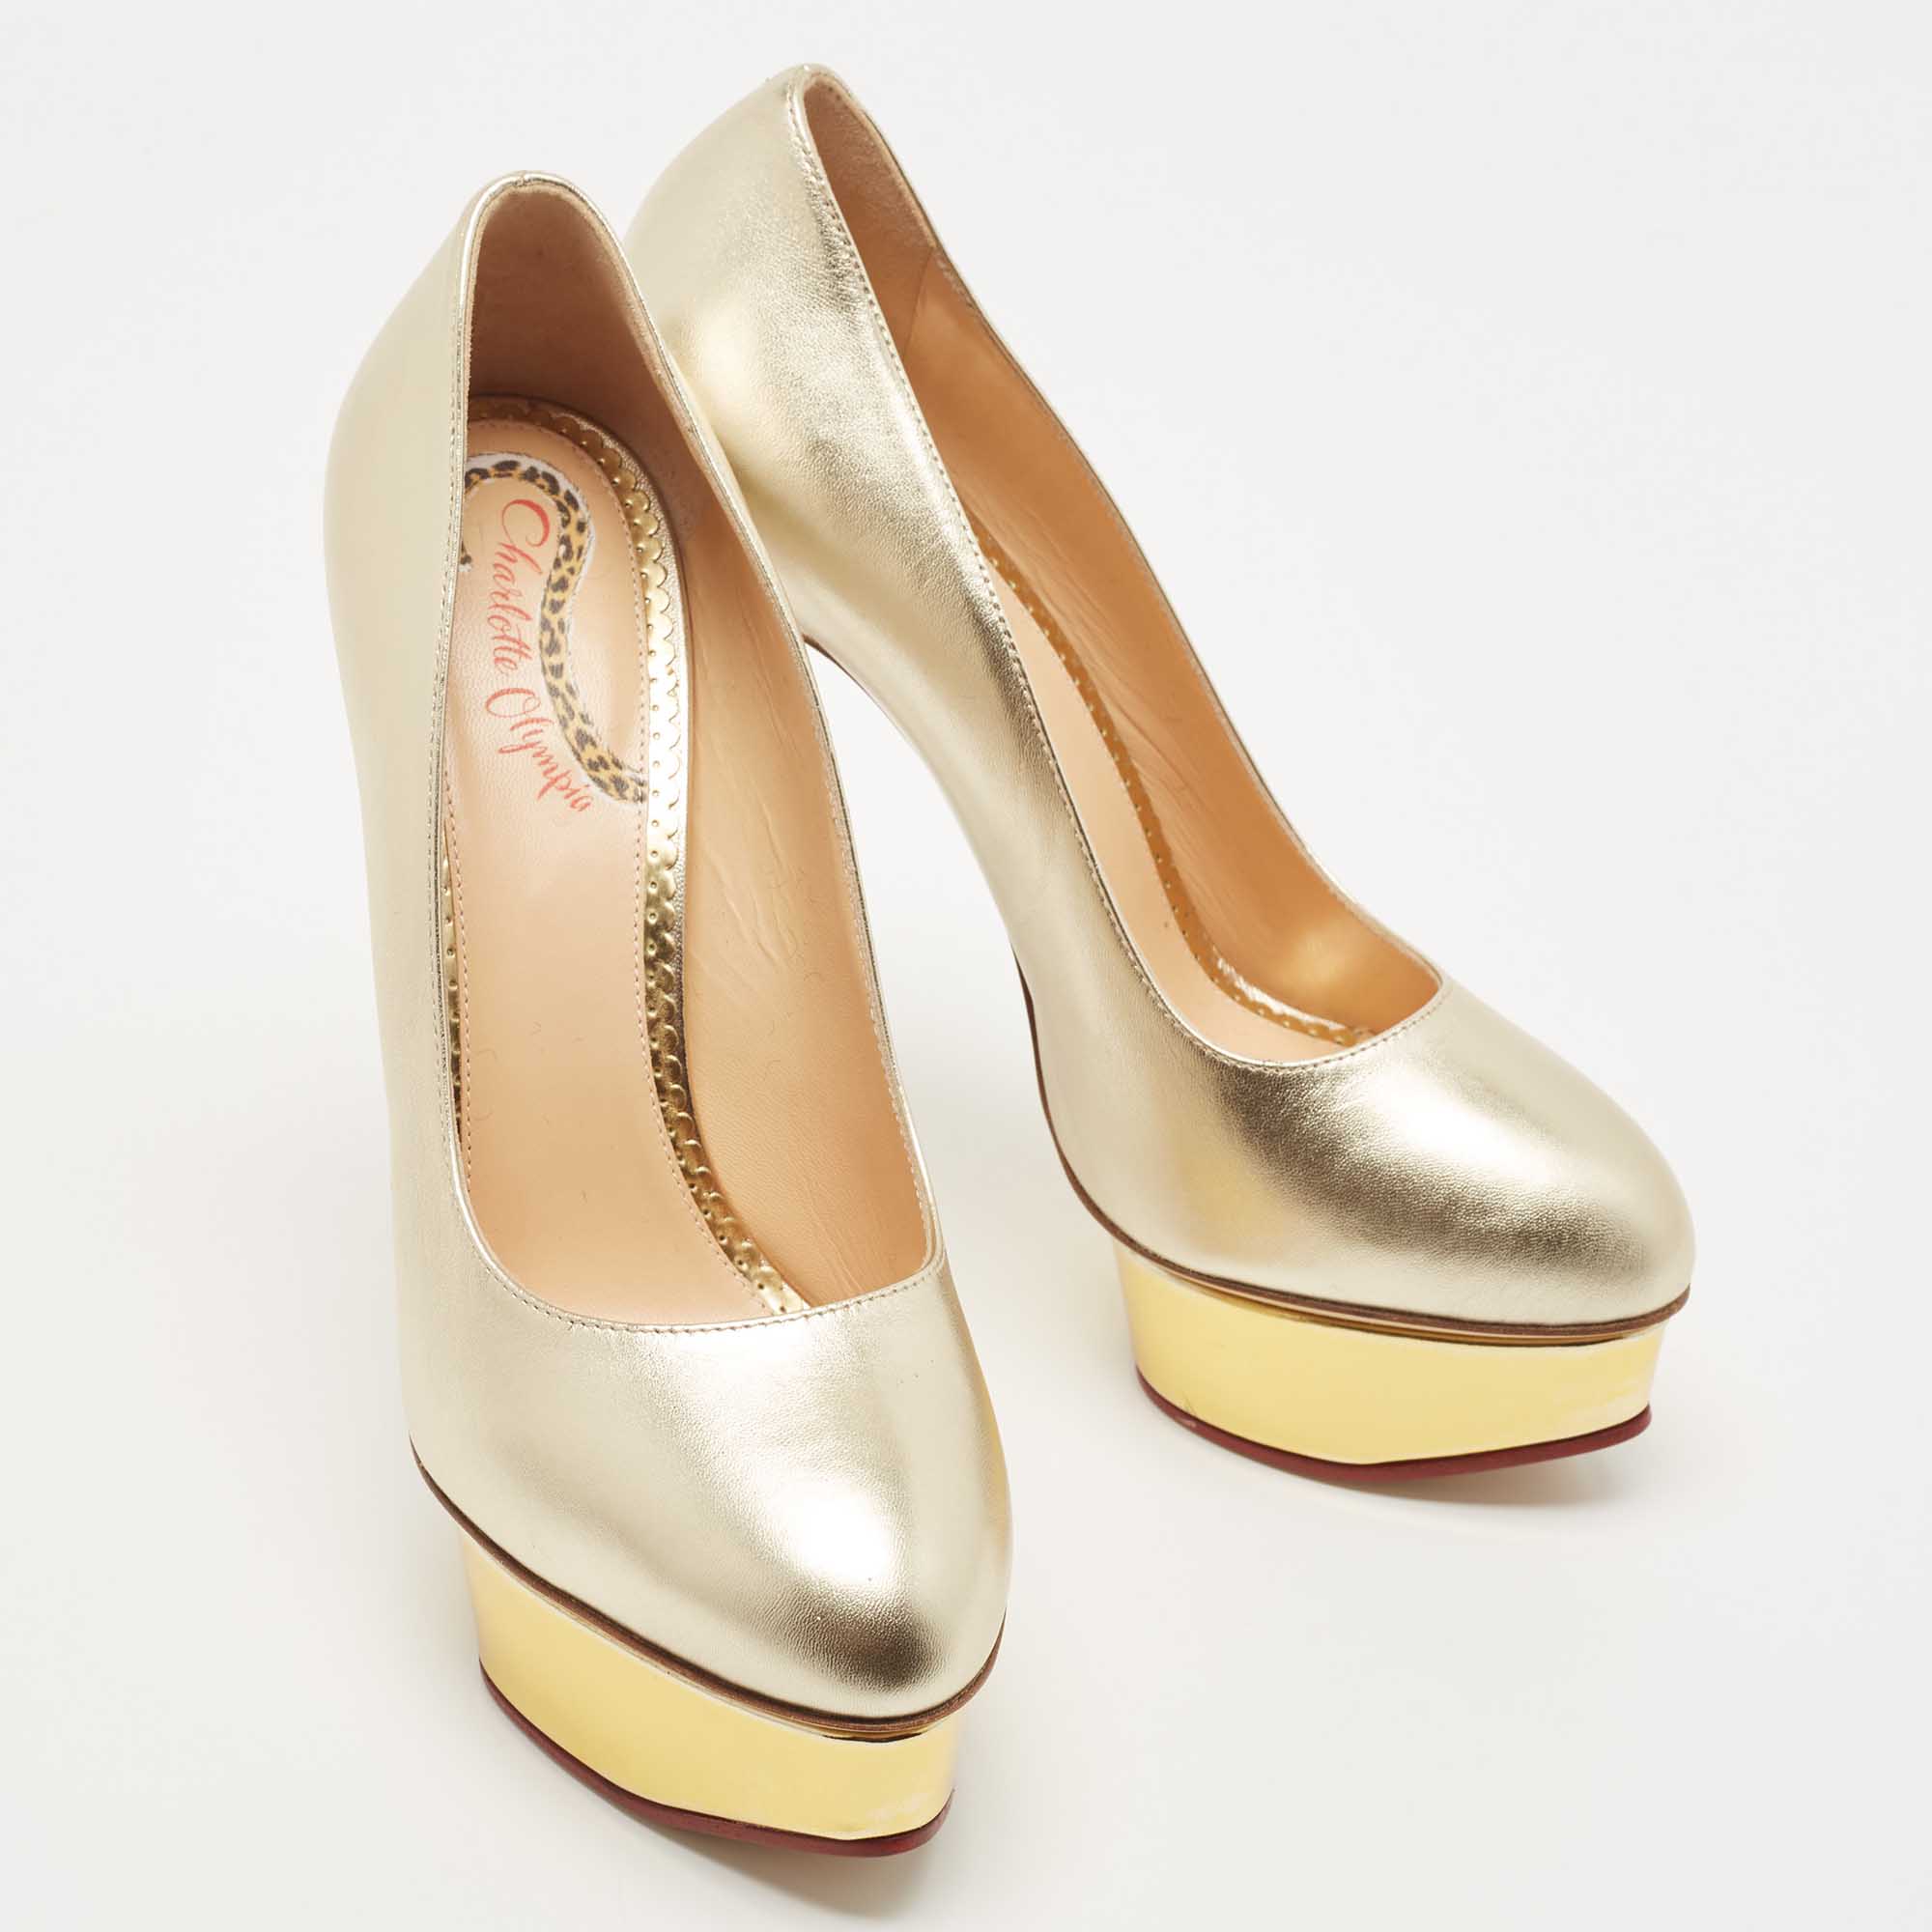 Charlotte Olympia Gold Leather Dolly Pumps Size 40.5